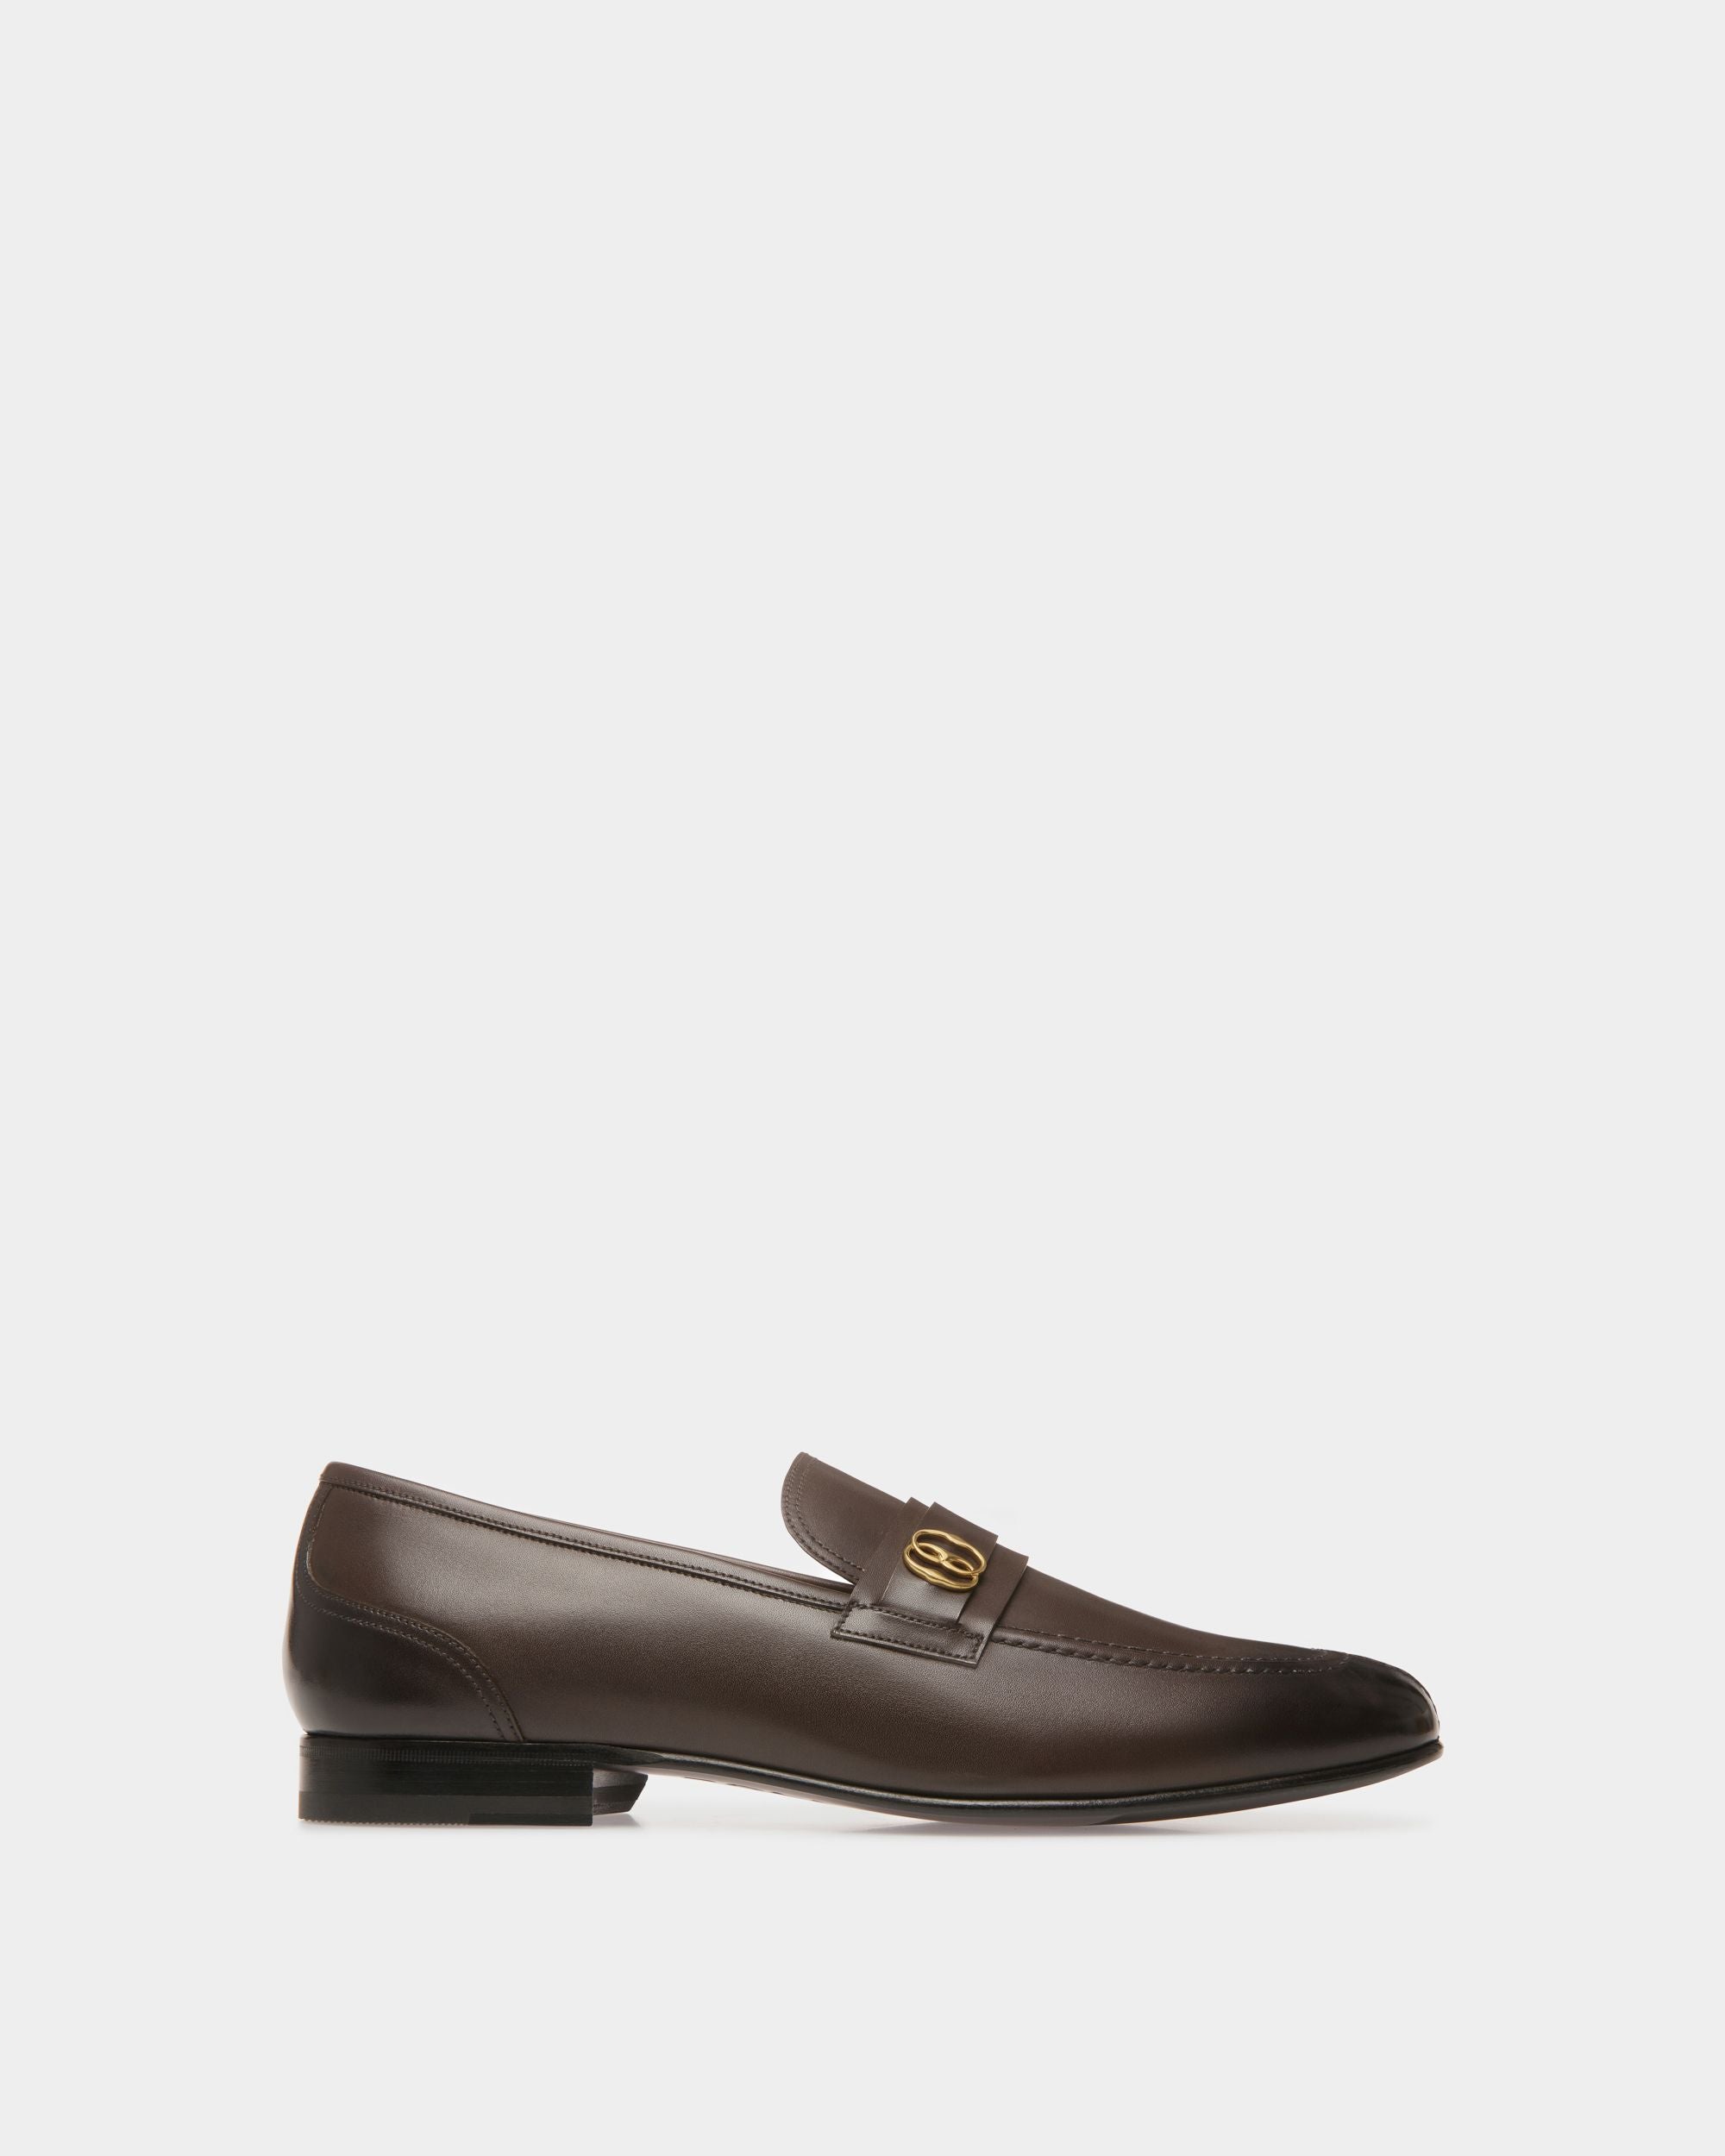 Sadei | Men's Loafers | Brown Leather | Bally | Still Life Side